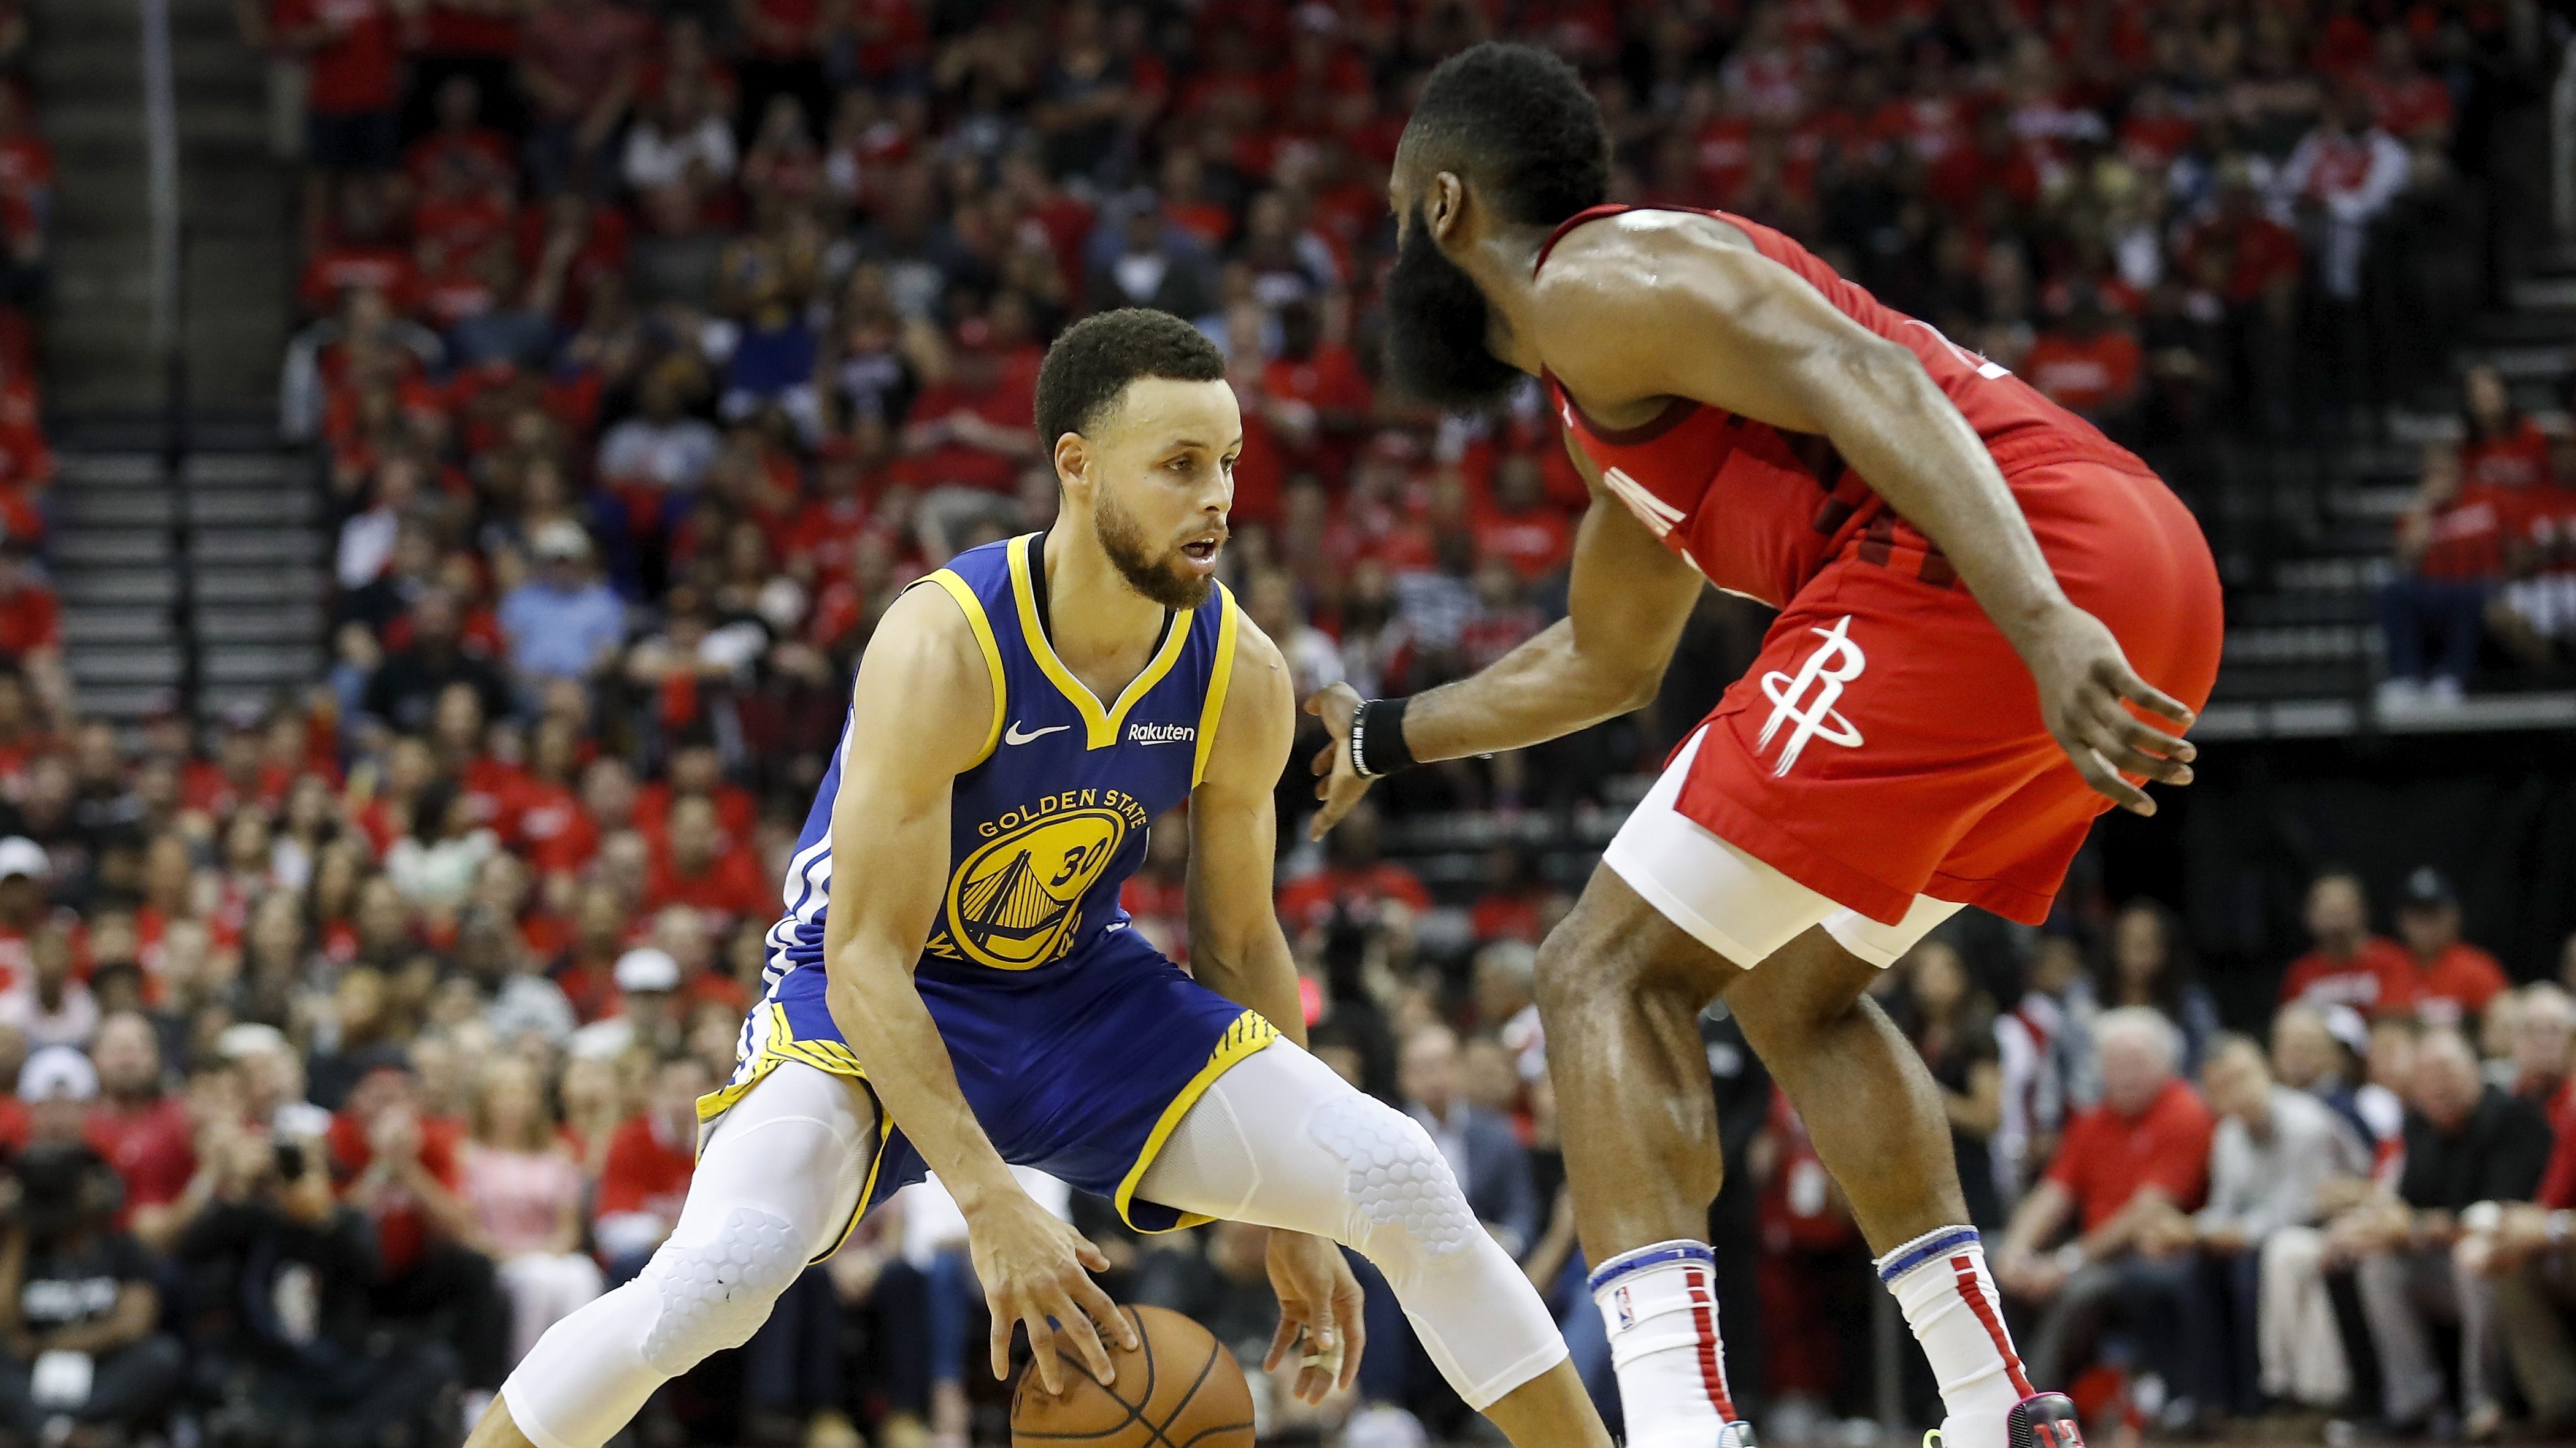 Warriors Playoff Schedule Next Game vs. Rockets & Conference Finals